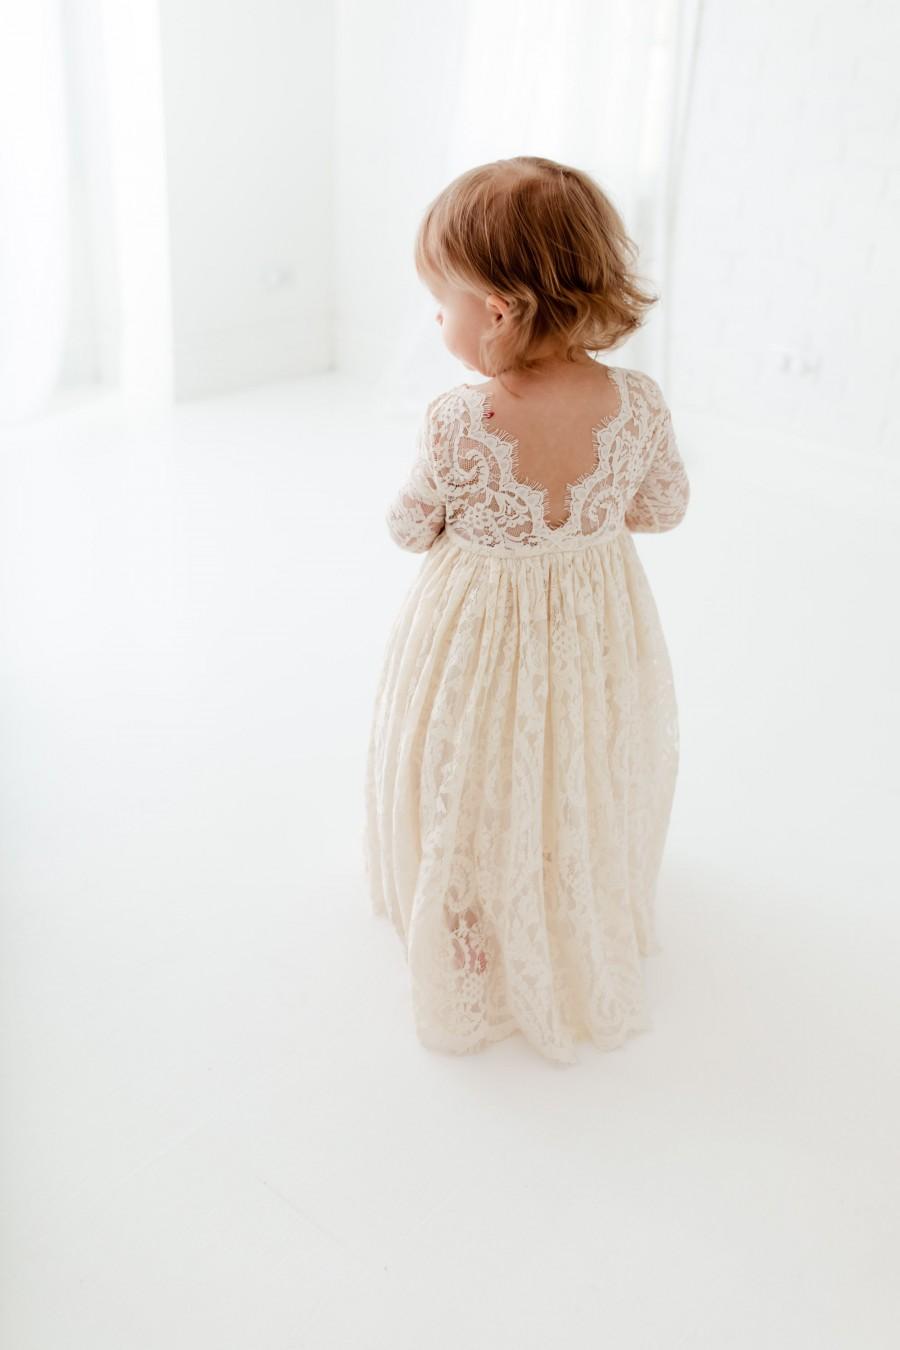 Mariage - Bohemian Ivory Flower Girl Dress, Rustic Tulle Wedding Dress, Will You Be My Flower Girl Proposal, Boho Dresses